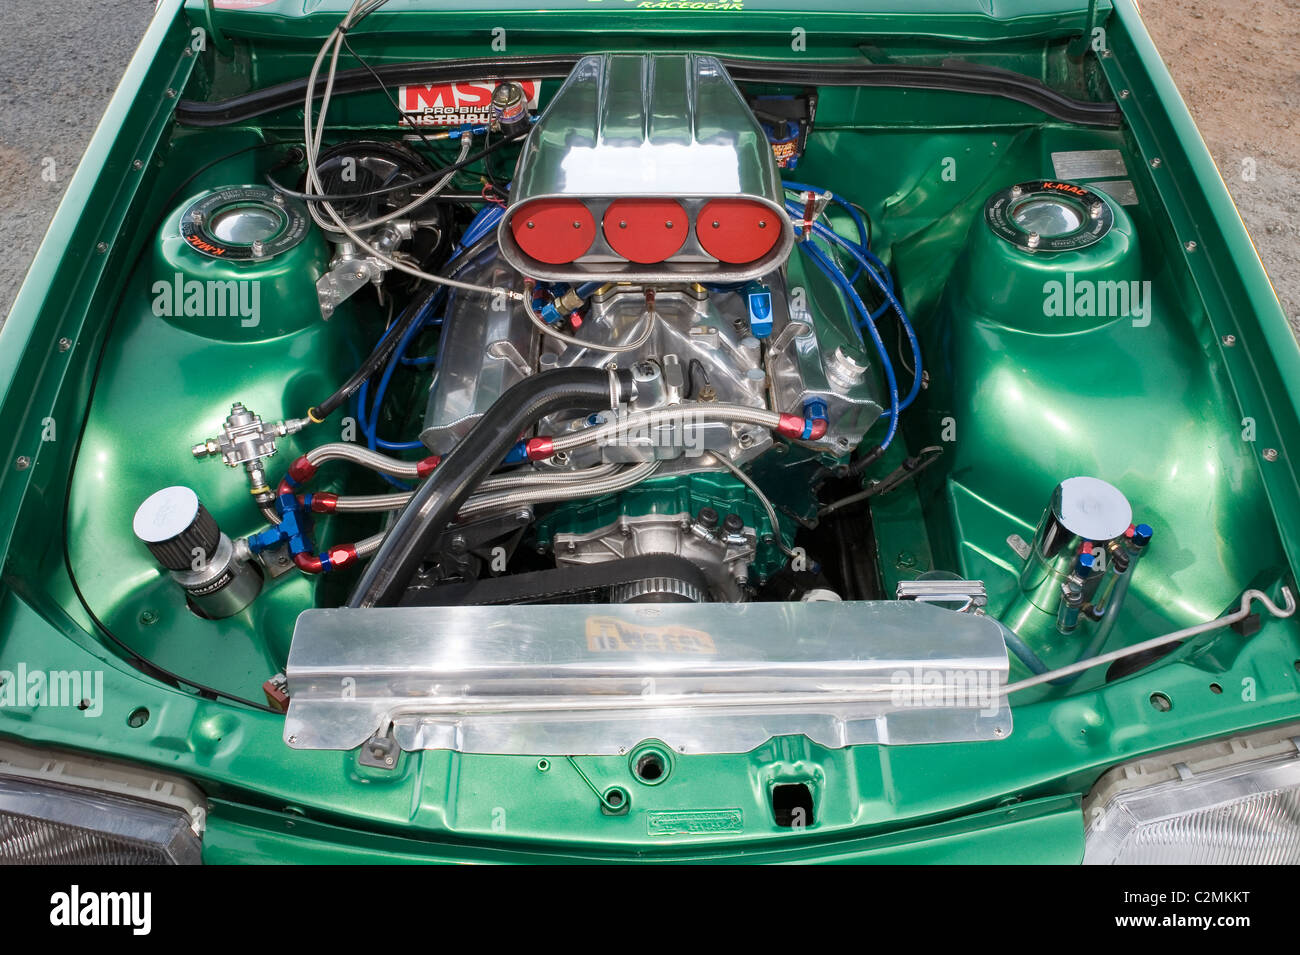 Heavily modified Holden V8 engine in an Aussie drag racing Holden Commodore. Stock Photo